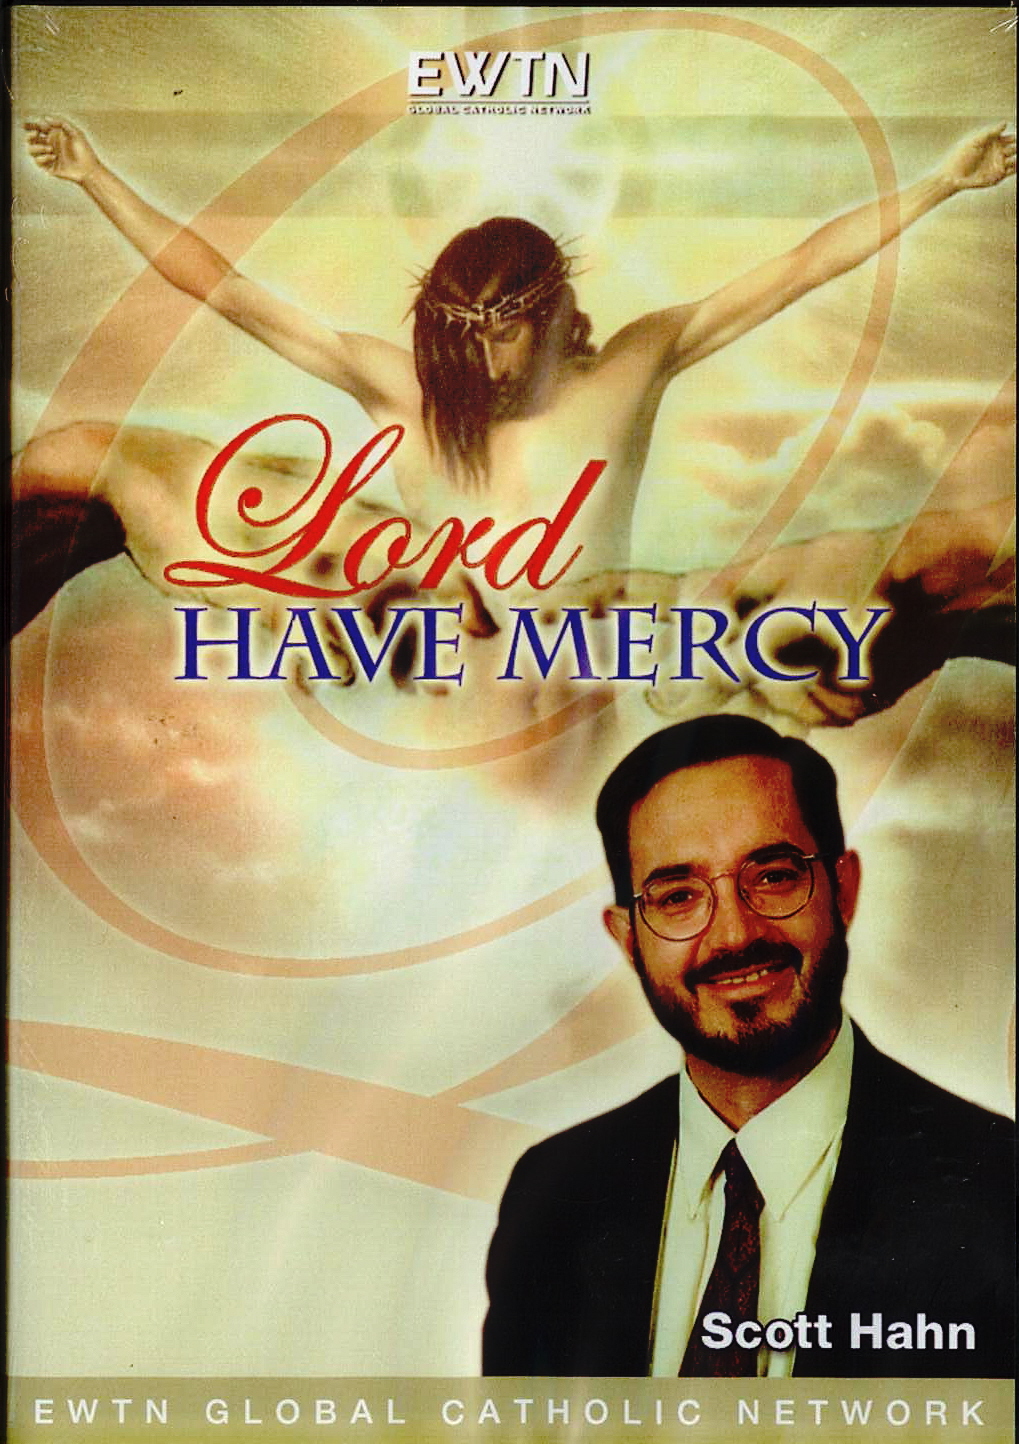 DVD-Lord Have Mercy, Title; Dr. Scott Hahn, Lecturer